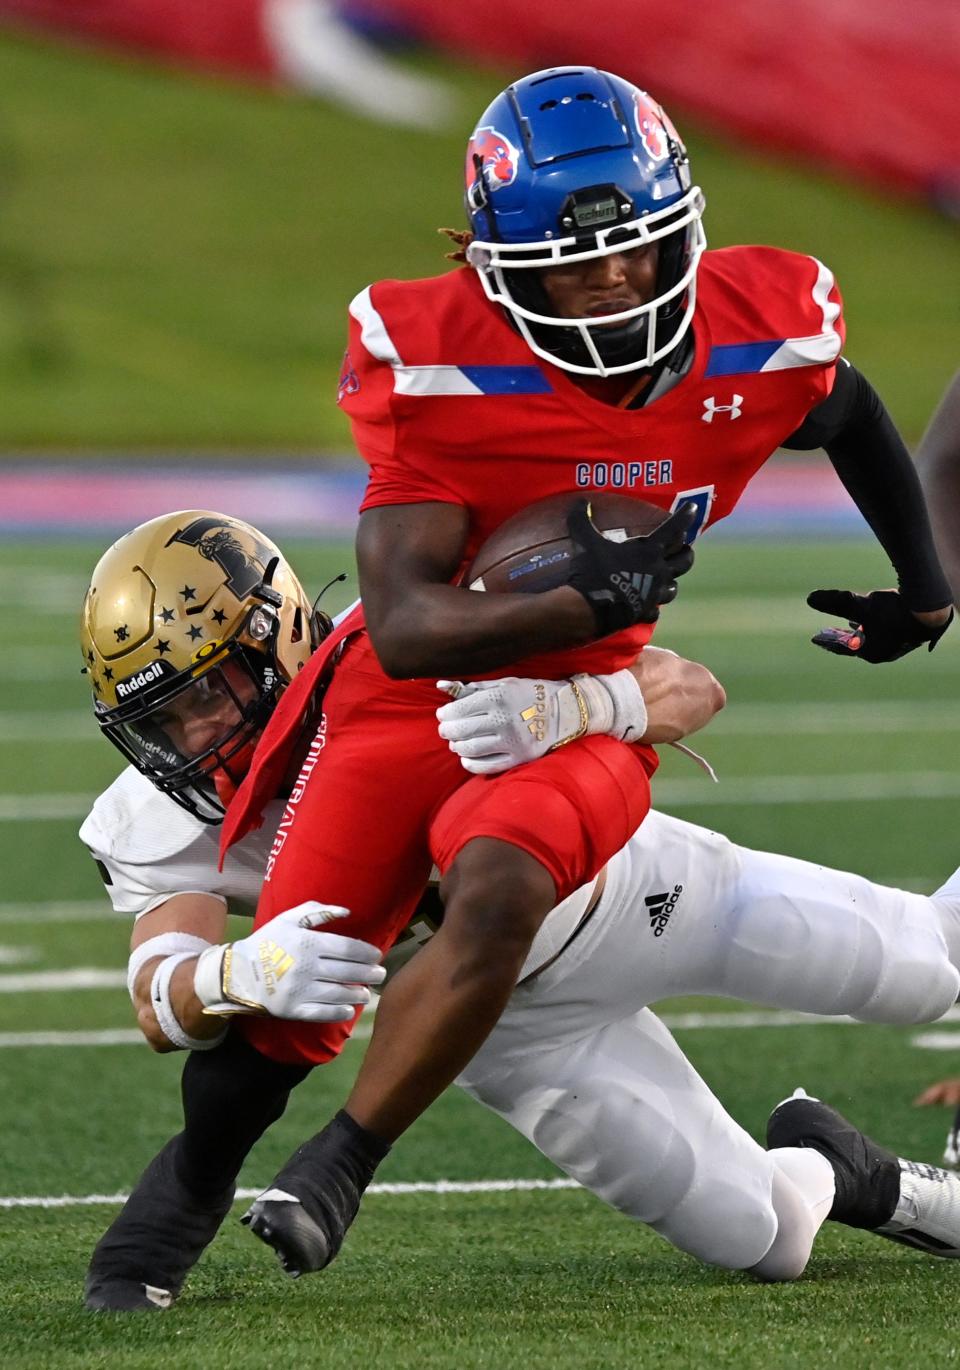 Cooper's  Zavian Alexander is tackled by Eagles linebacker Bryce Neves during the Crosstown Showdown on Sept. 1 at Shotwell Stadium.